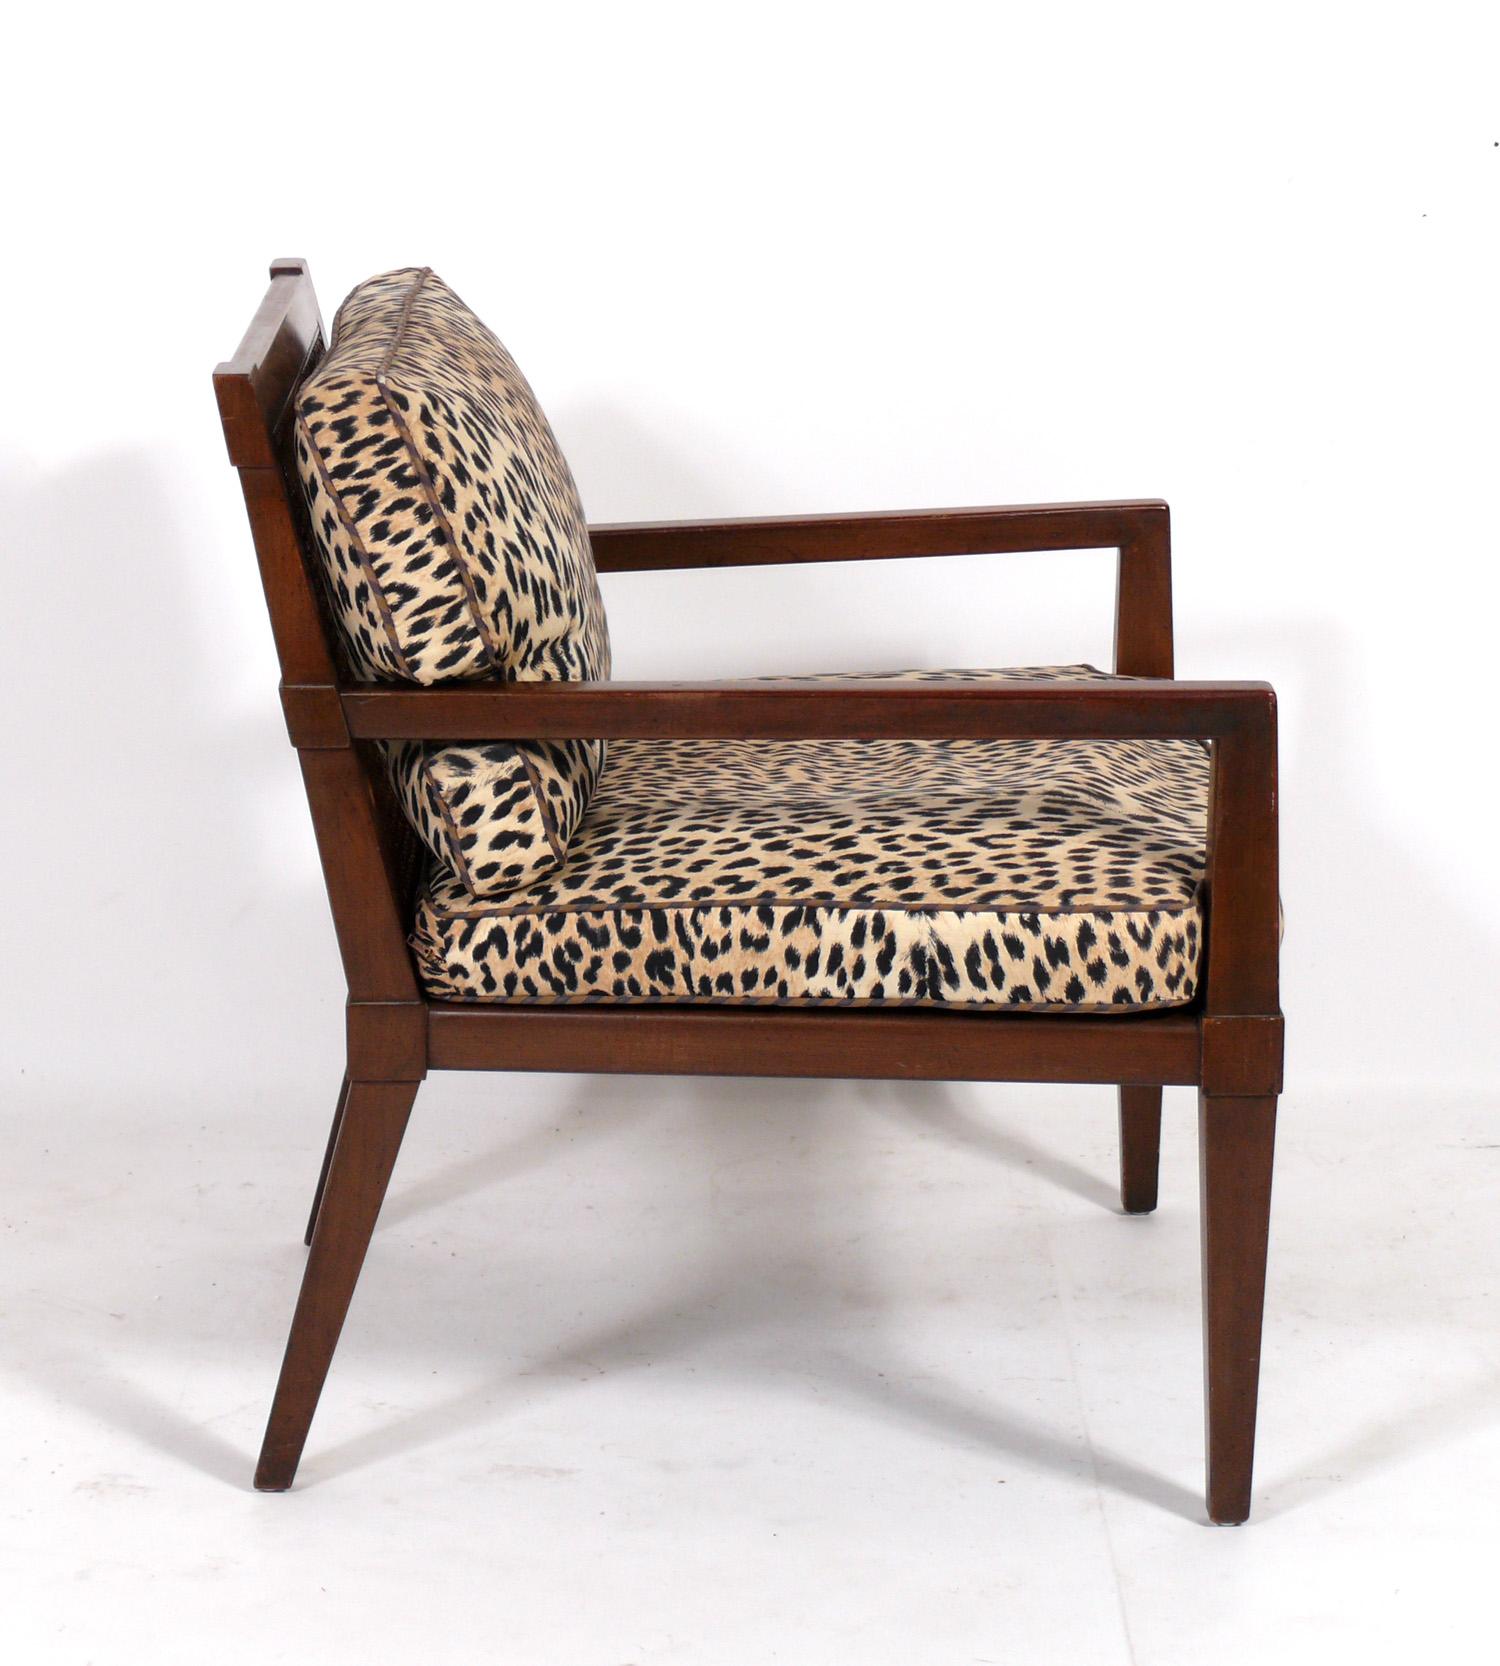 Pair of Mid Century Caned Back lounge chairs, American, circa 1950s. These chairs are being refinished and reupholstered and can be completed in your choice of wood finish color and reupholstered in your fabric. The price noted INCLUDES refinishing